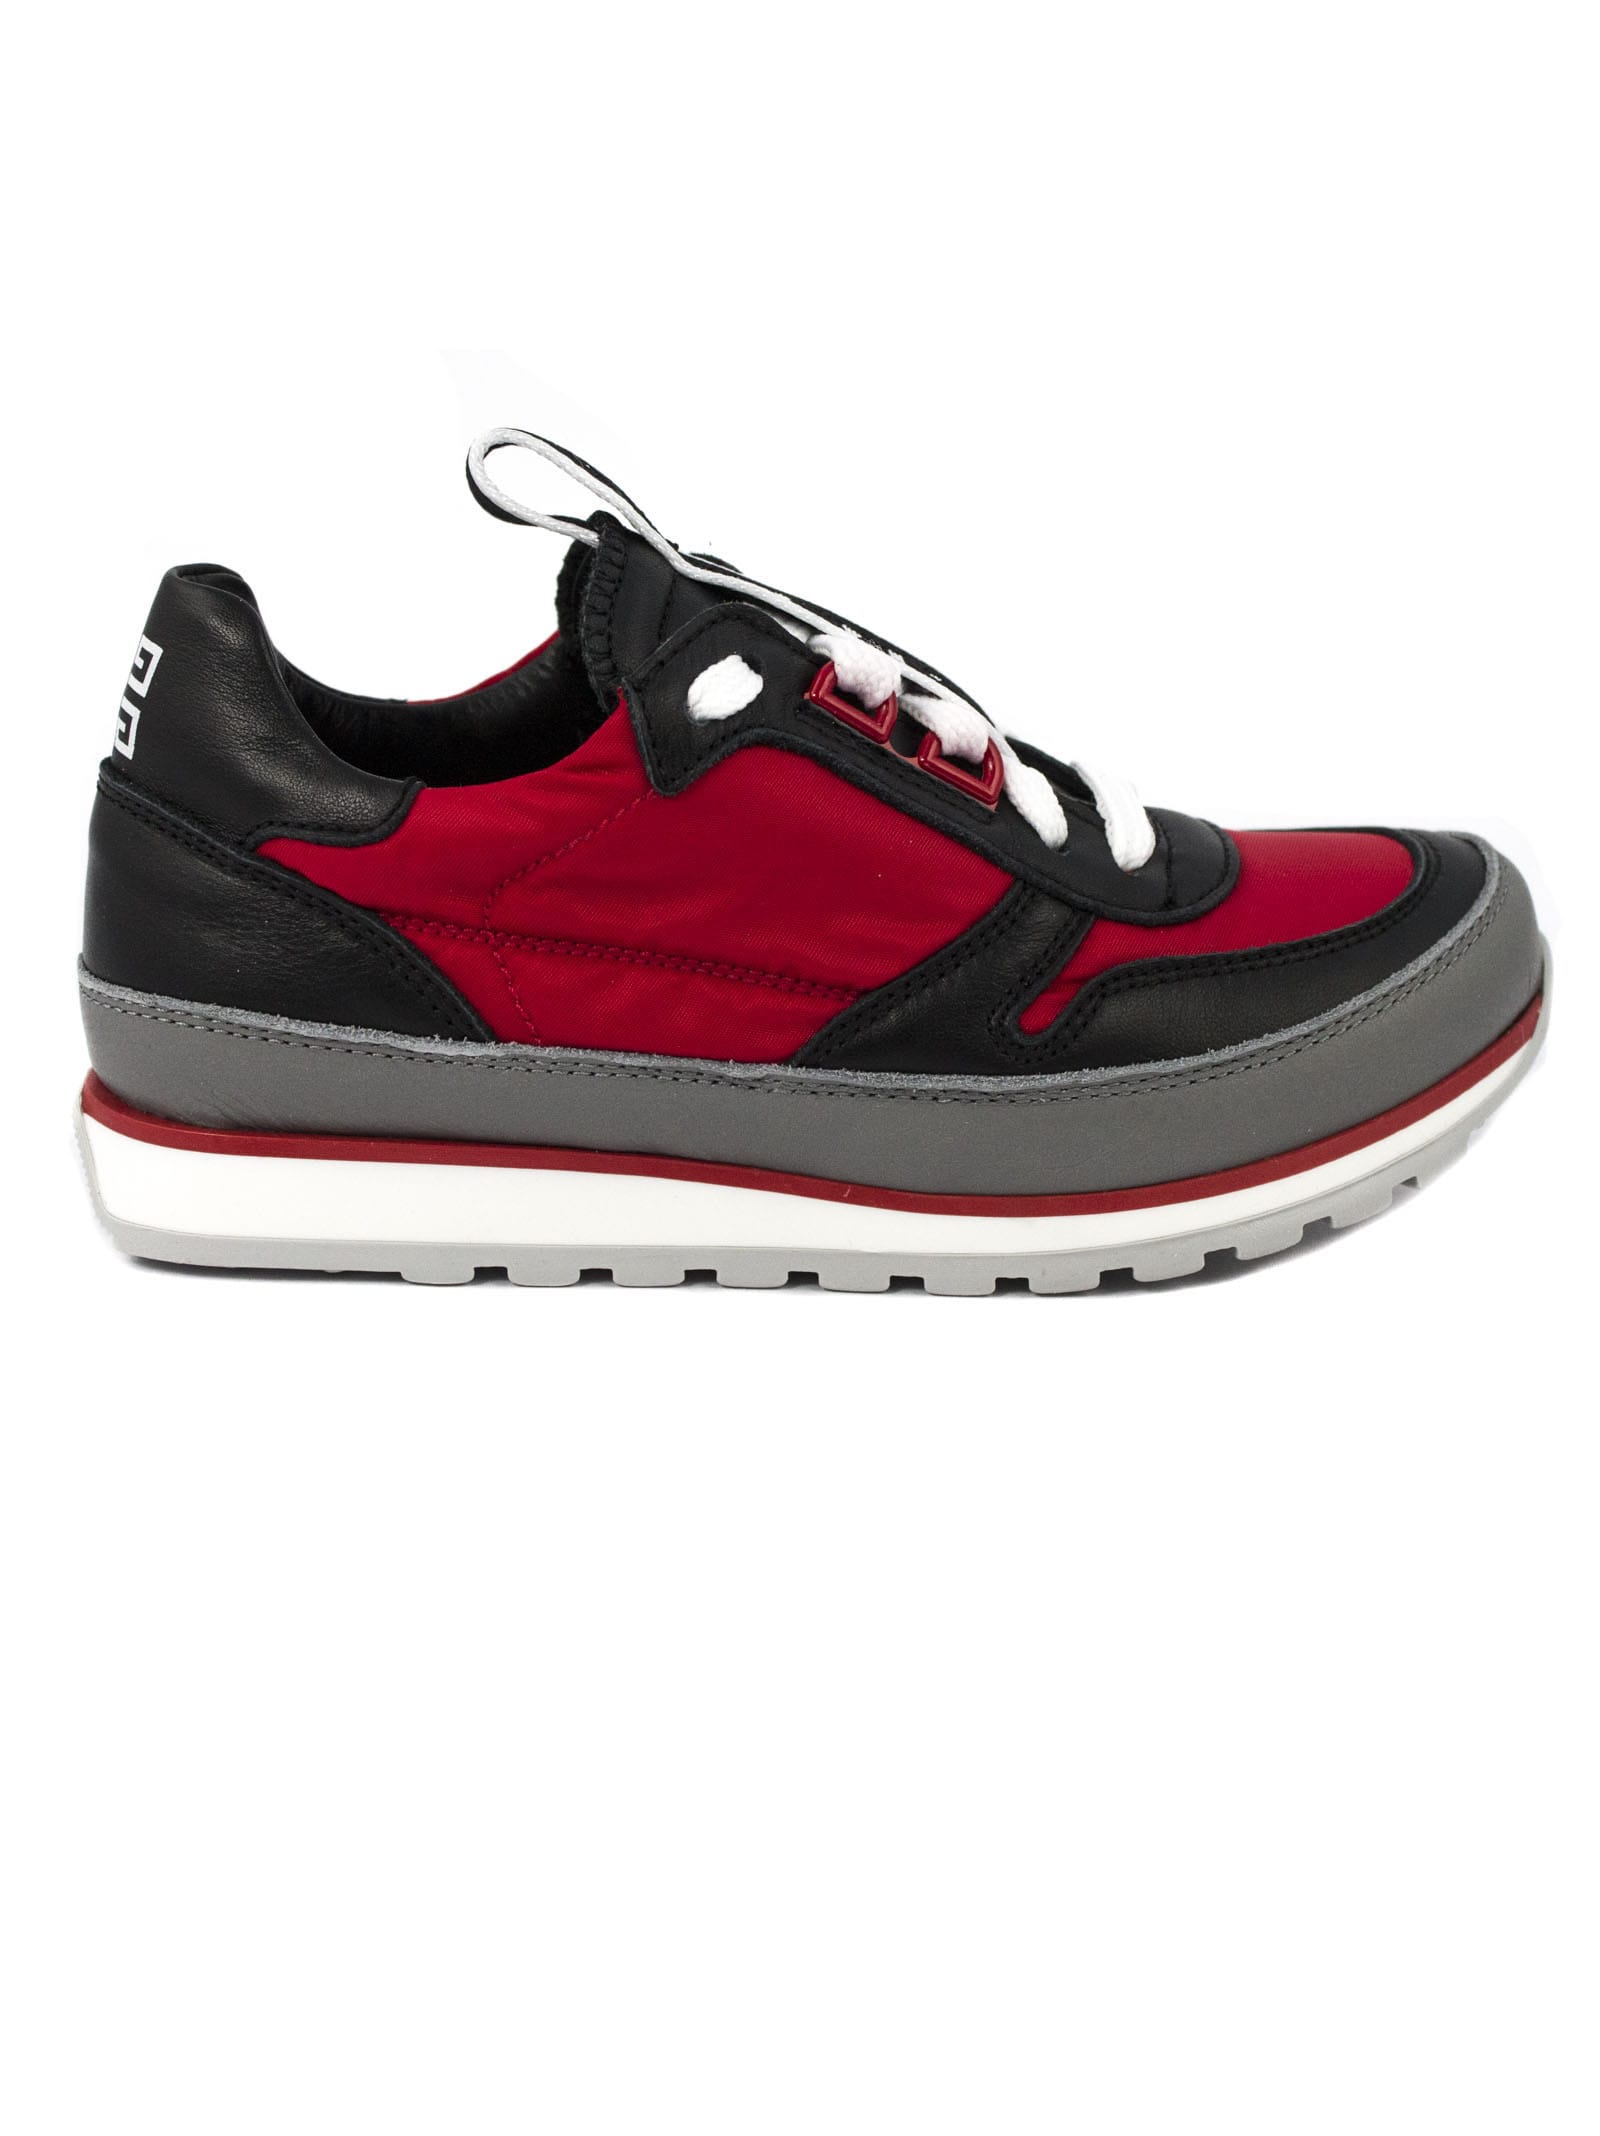 Givenchy Black And Red Leather Sneaker